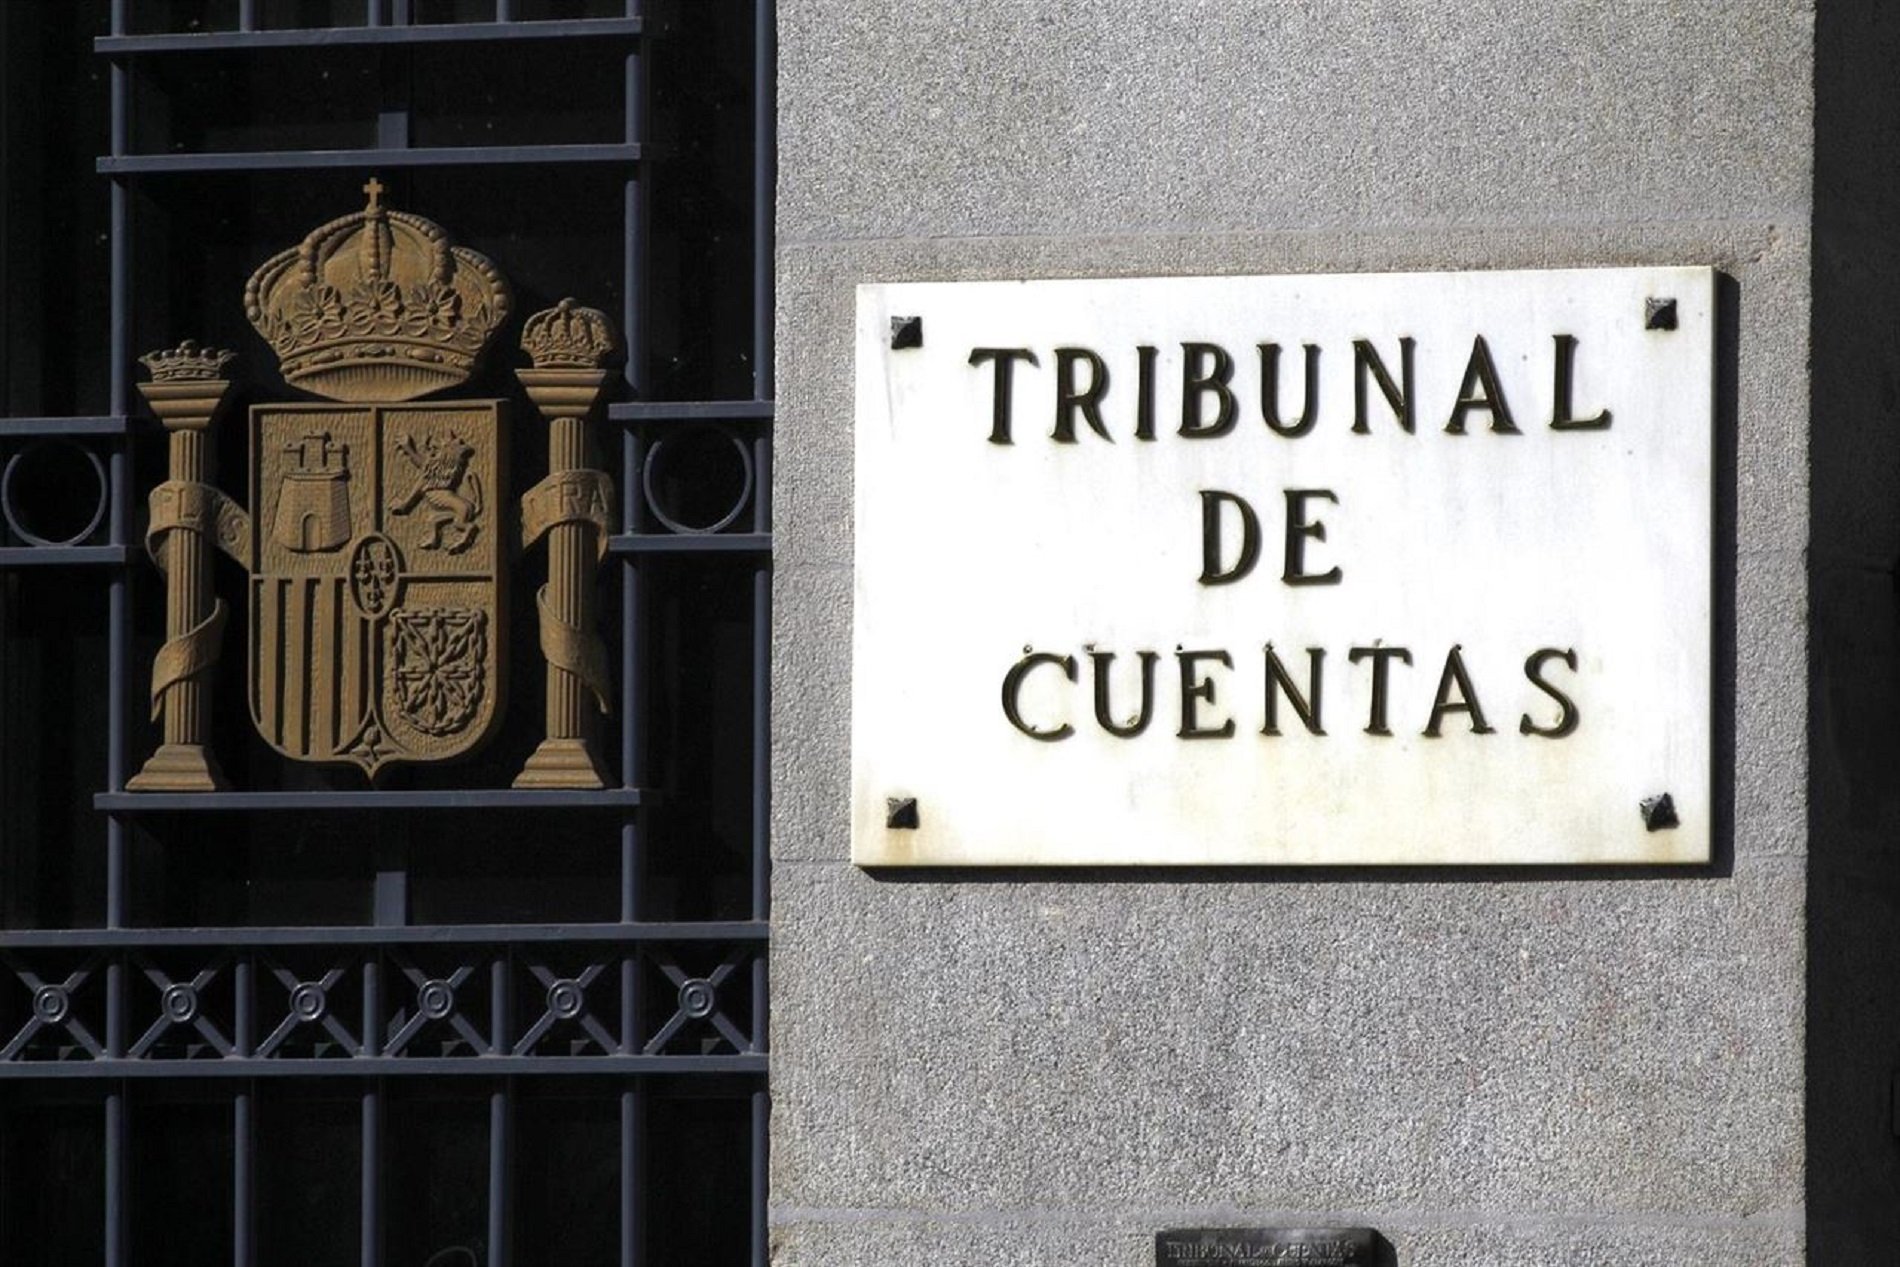 Dissenting member of Spain's Court of Accounts accuses it of bias in Catalan case